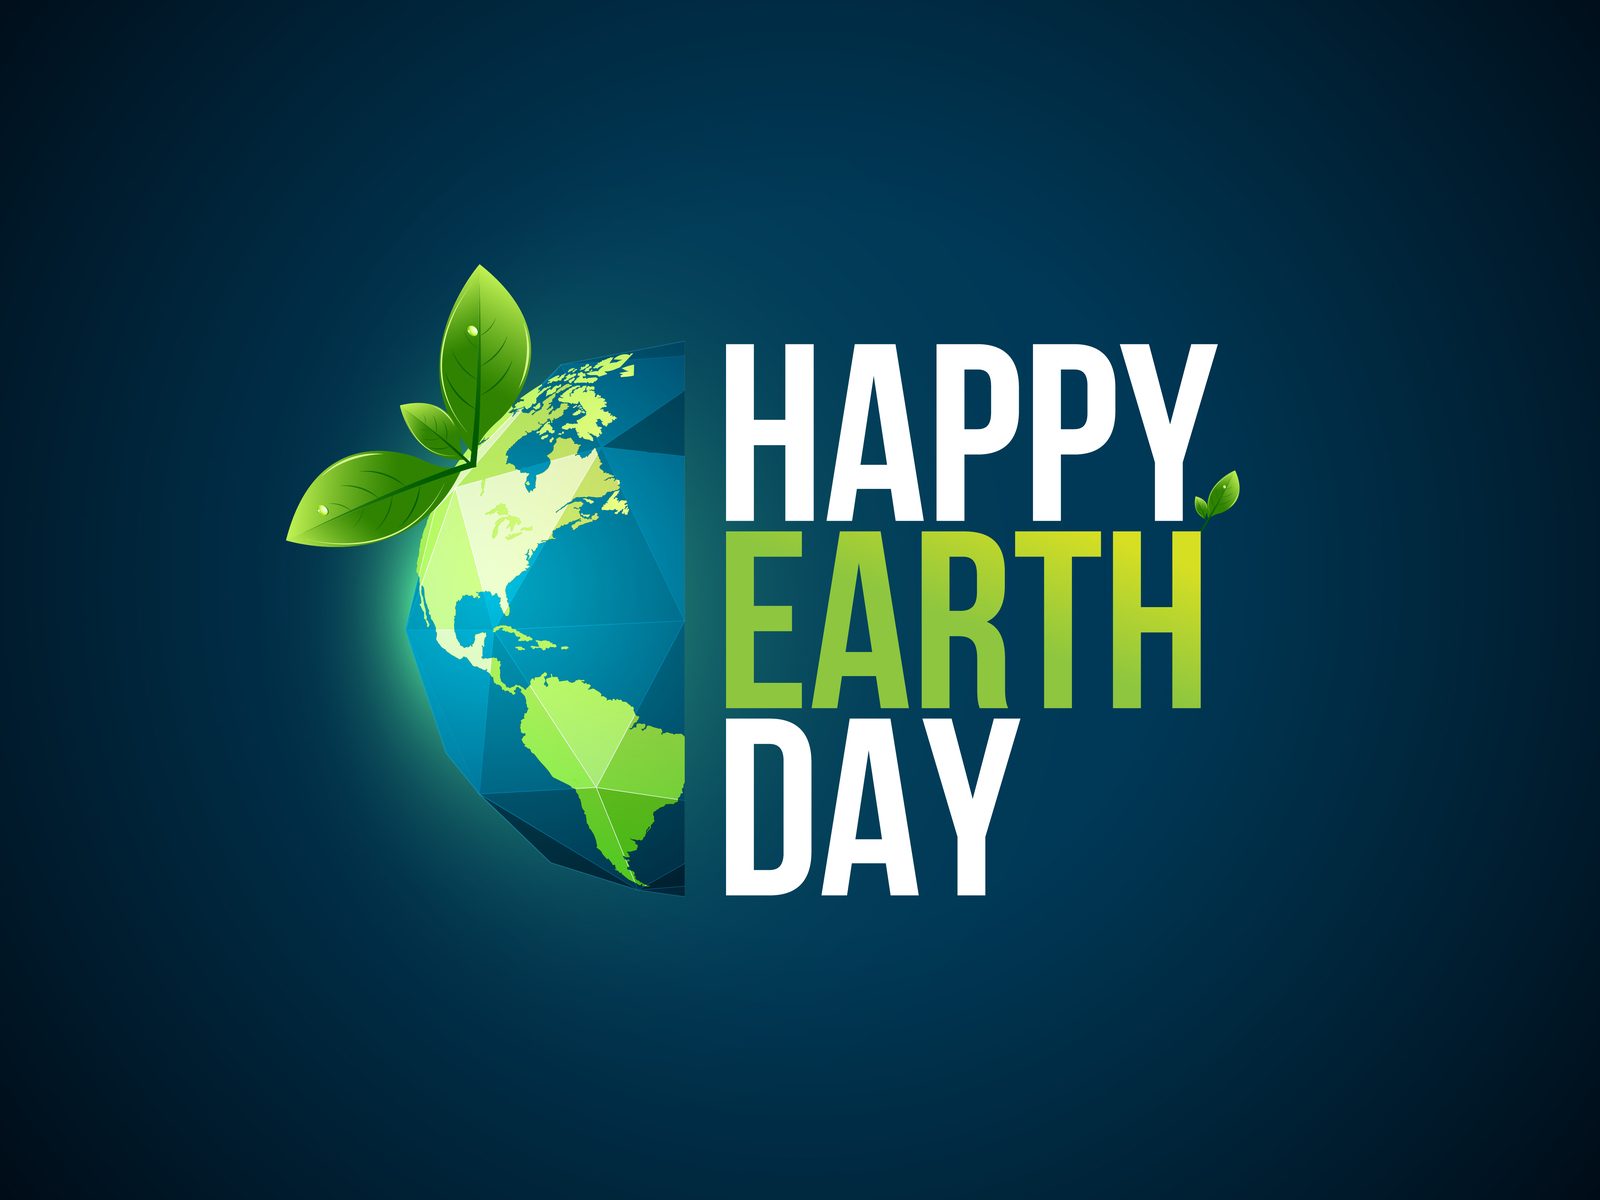 Happy Earth Day 2022: Wishes, Images, Status, Quotes, Messages and WhatsApp  Greetings to Share